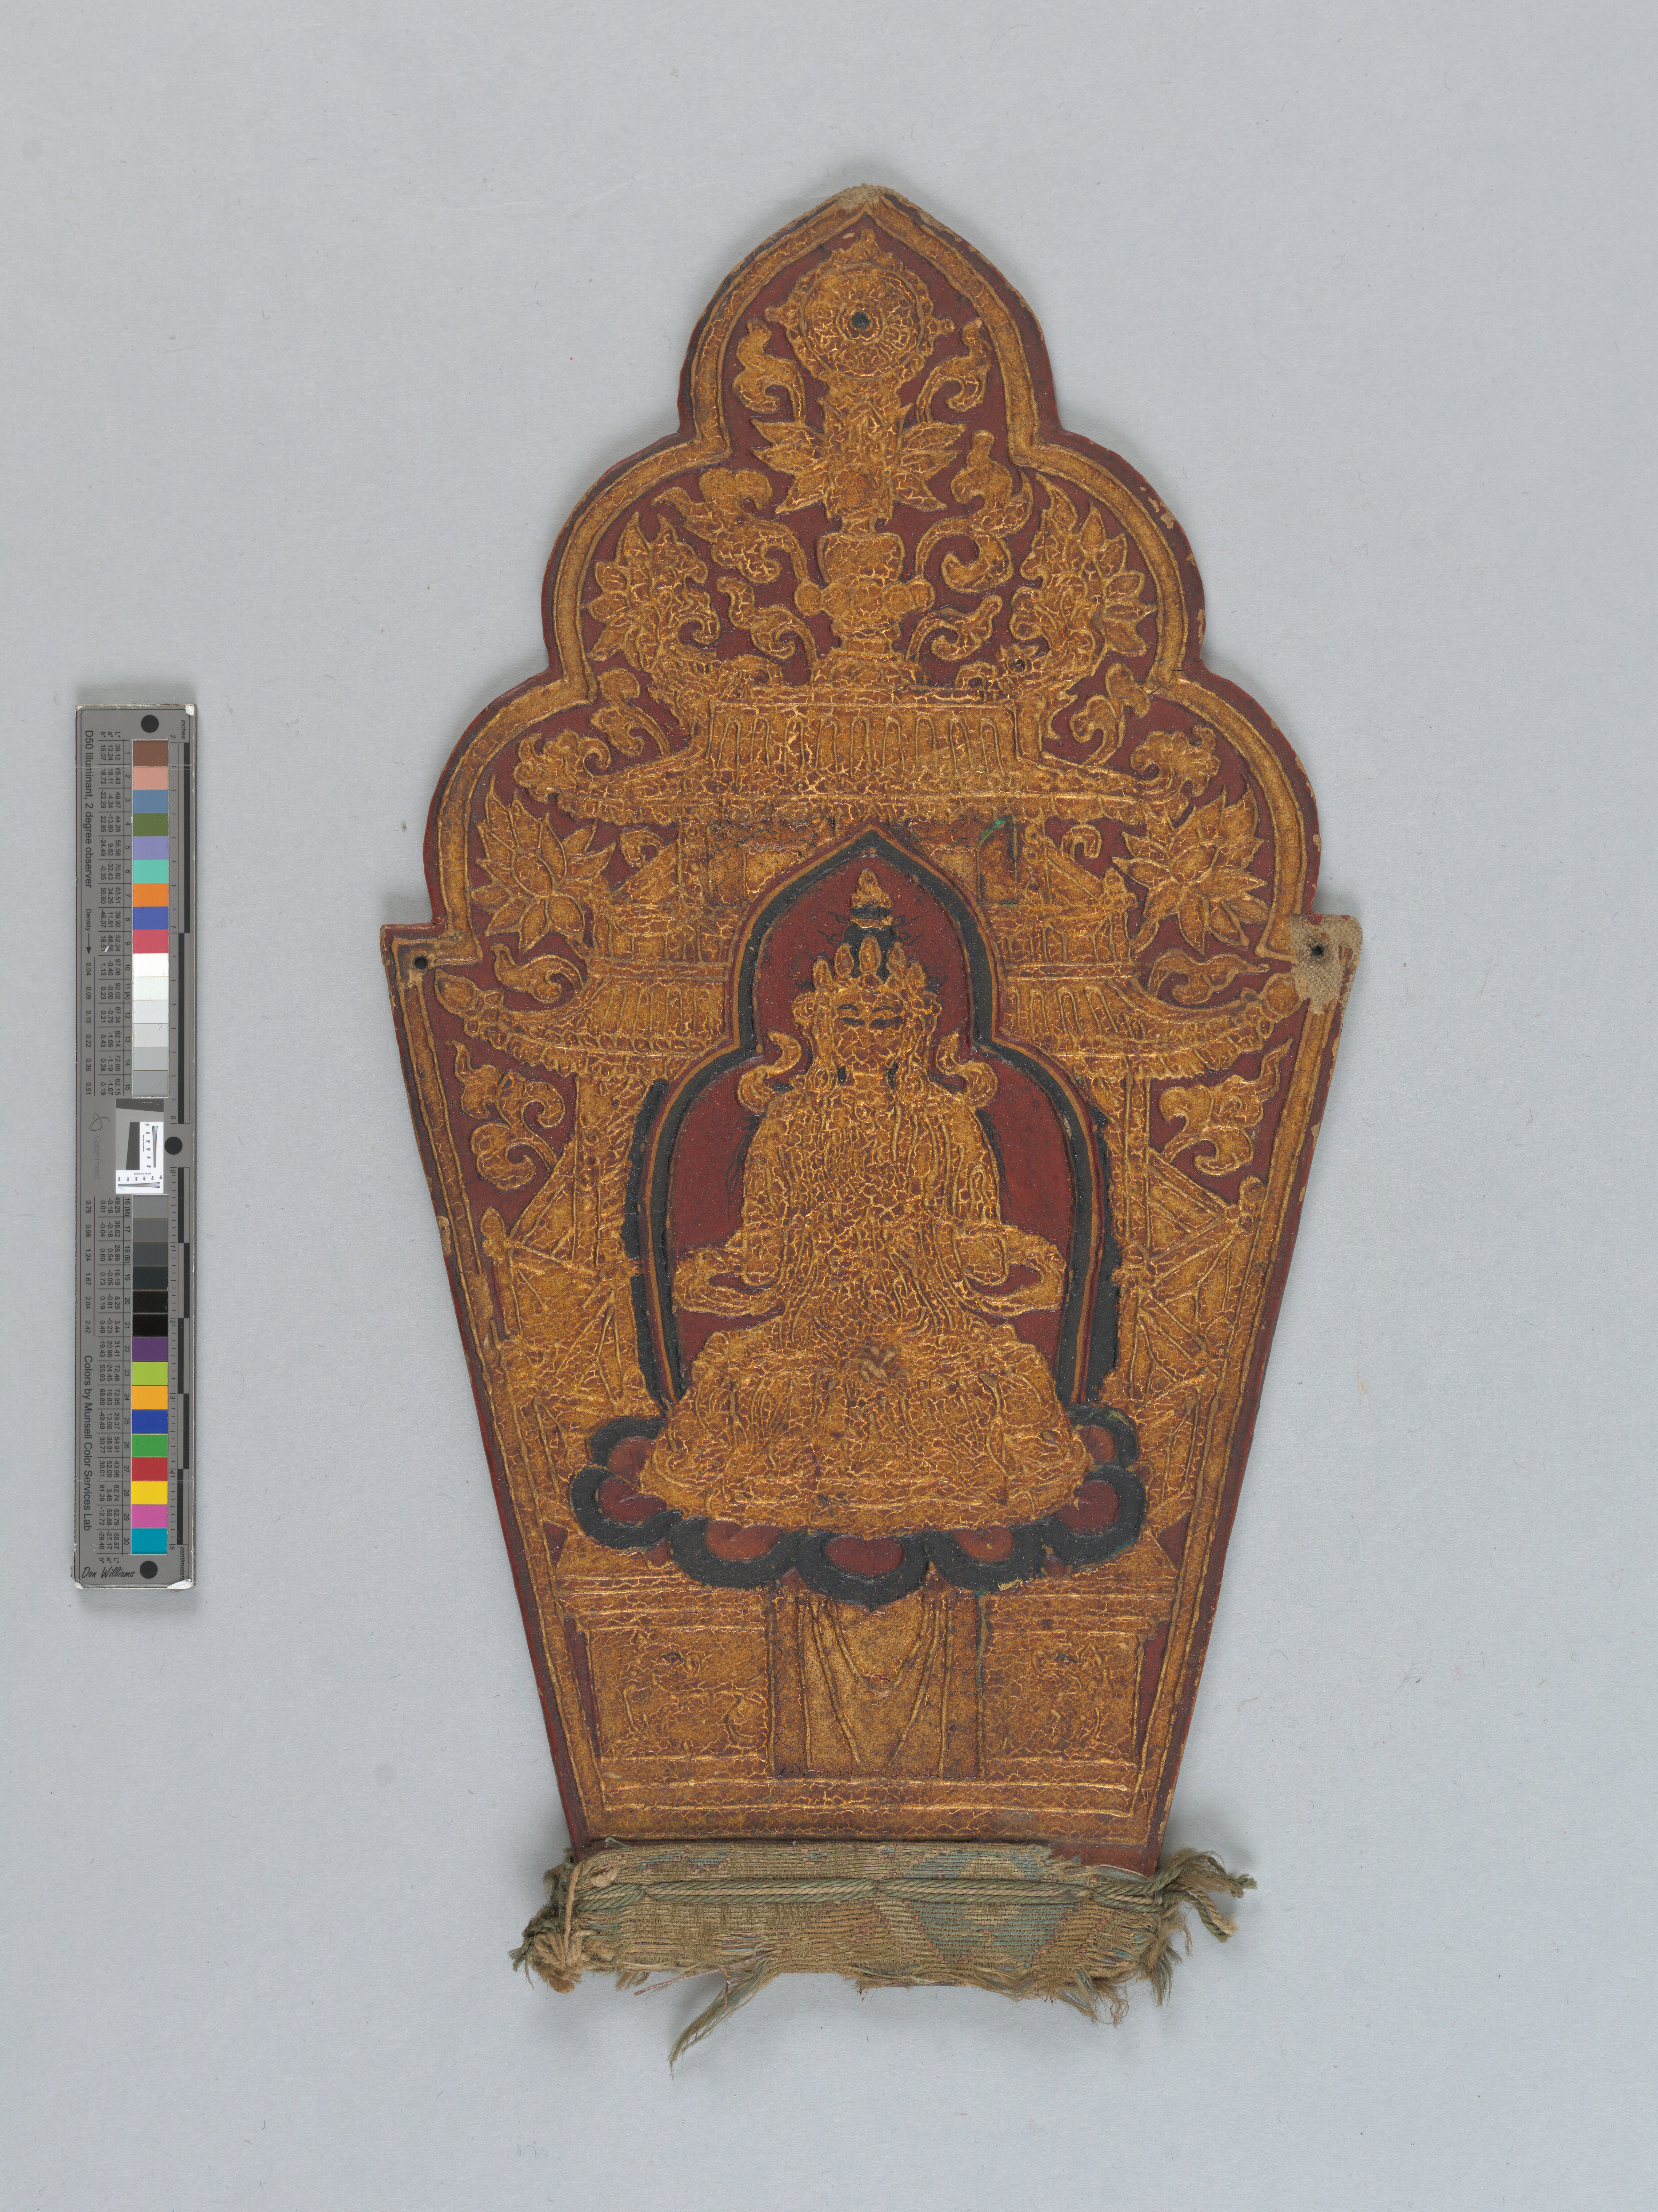 Torana-shaped panel with gilded raised decoration depicting a seated figure with some outlines in black and a red background.